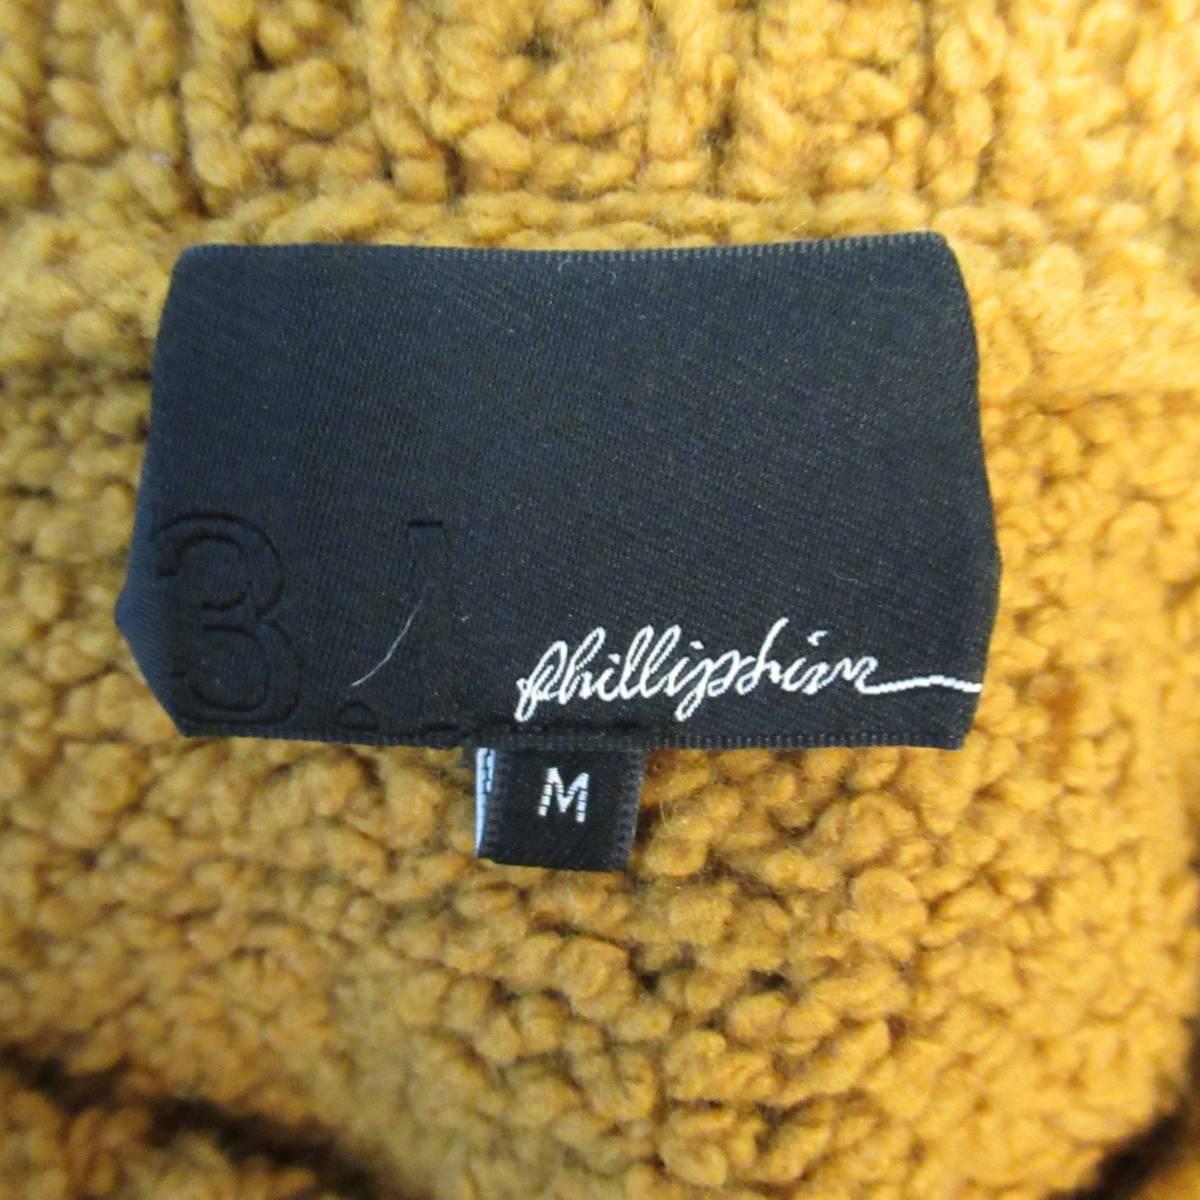 Women's or Men's 3.1 PHILLIP LIM Size M Gold Chunky Wool Blend Contrast Knit Pullover Sweater